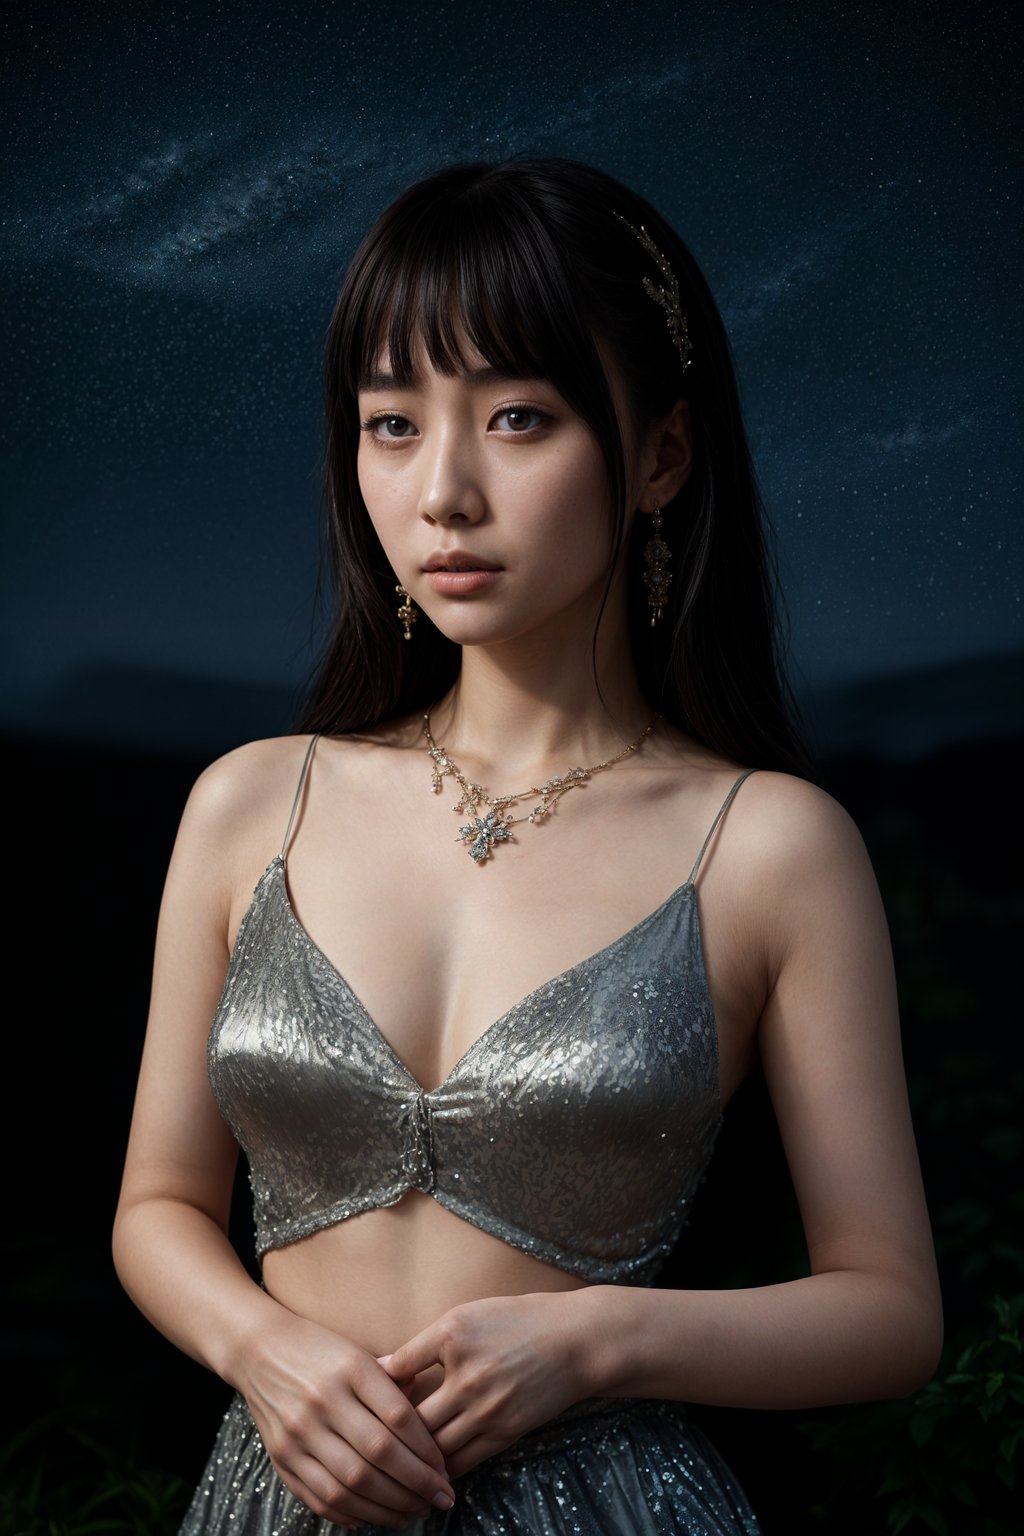 woman with magnetic appeal, adorned in sparkling jewelry , against a starry night backdrop